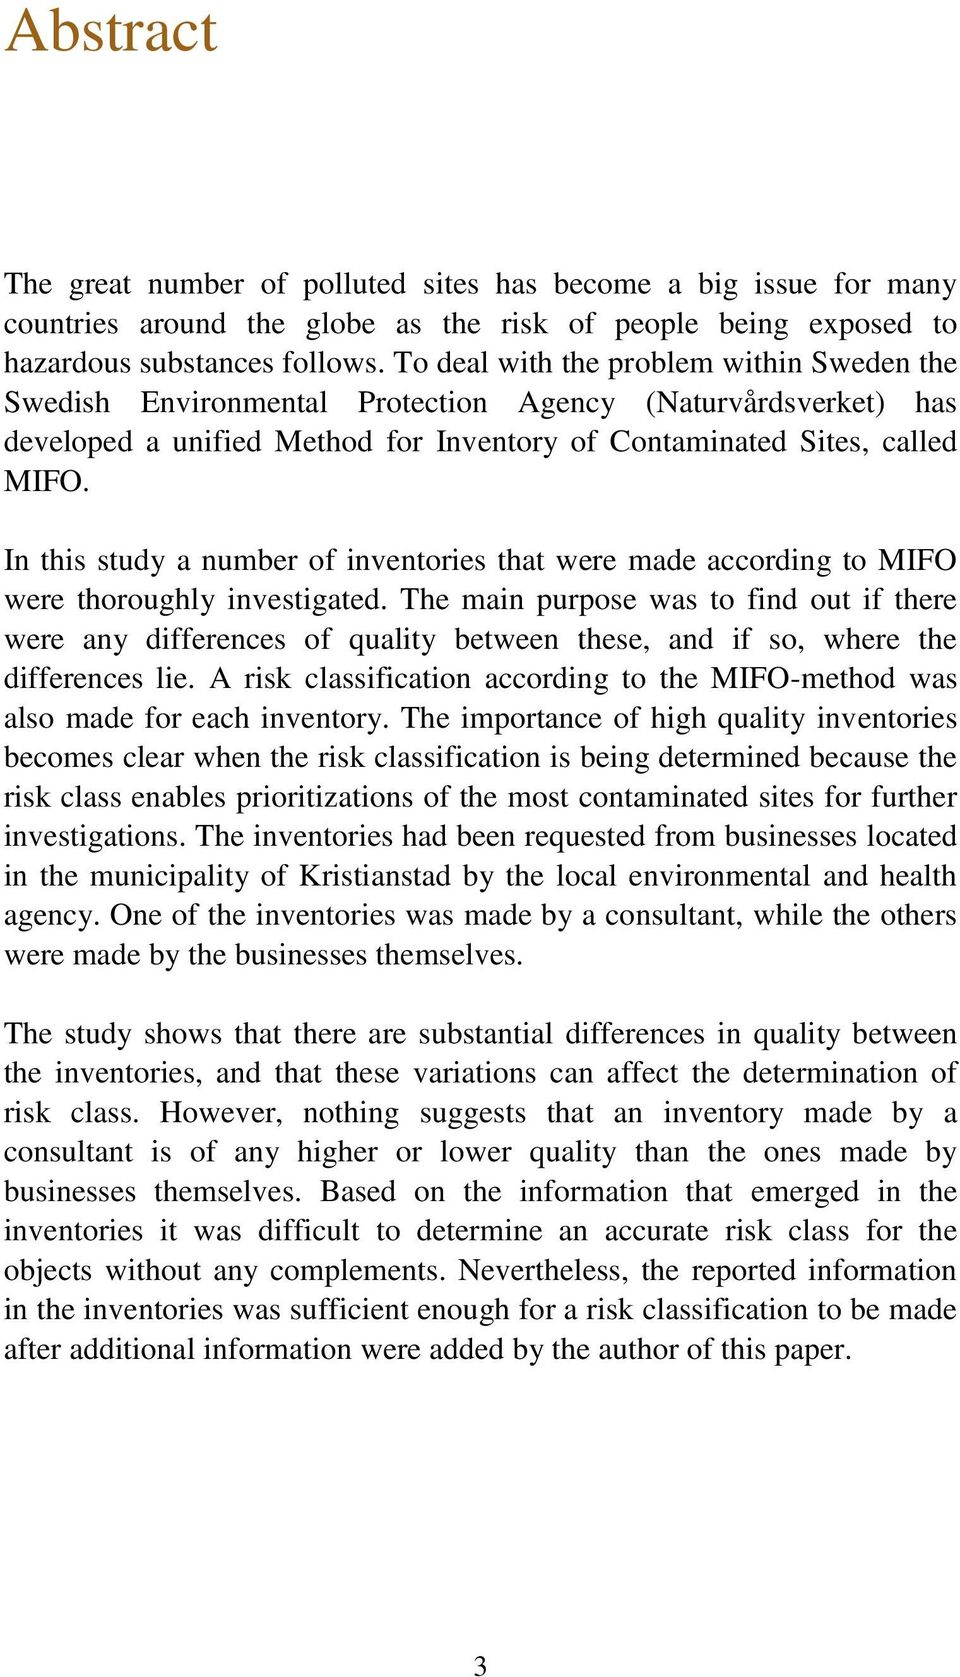 In this study a number of inventories that were made according to MIFO were thoroughly investigated.